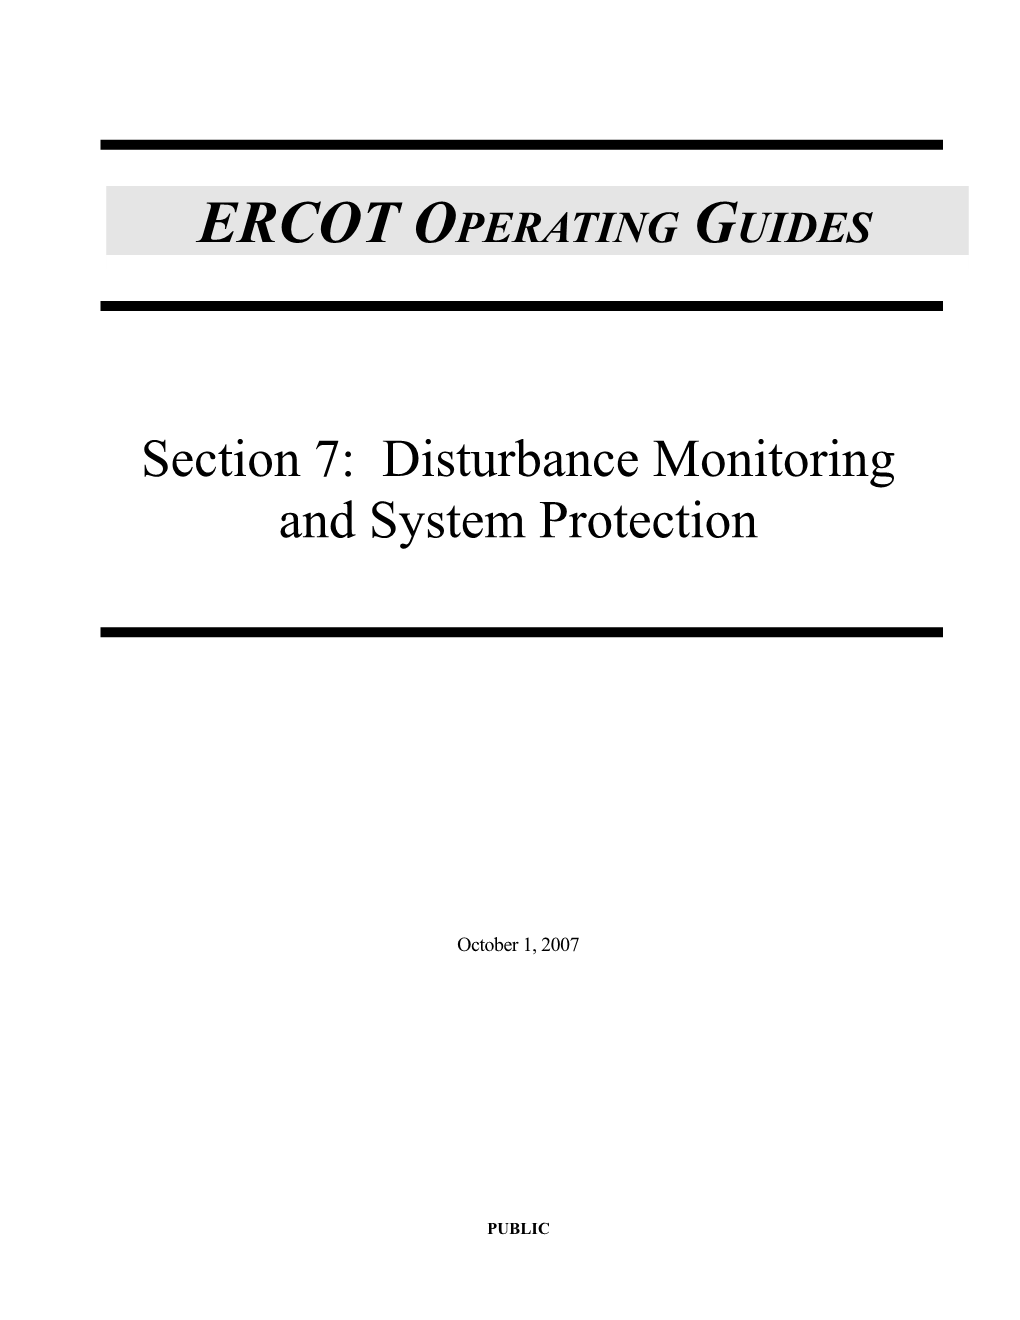 Section 7: Disturbance Monitoring and System Protection